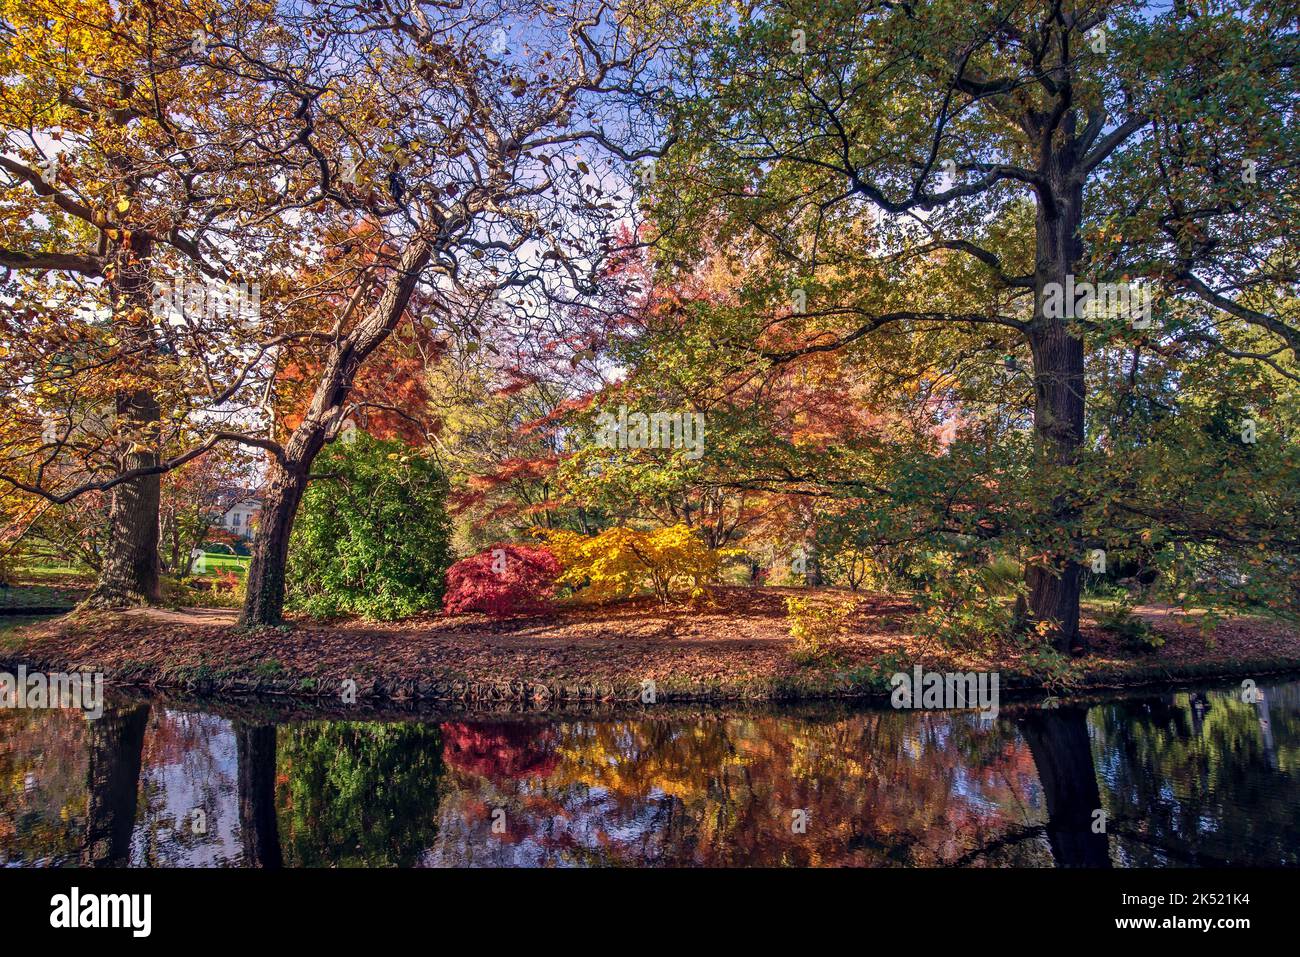 Fall foliage and water reflections in a pond in Vallee aux Loups arboretum near Paris, France. Stock Photo